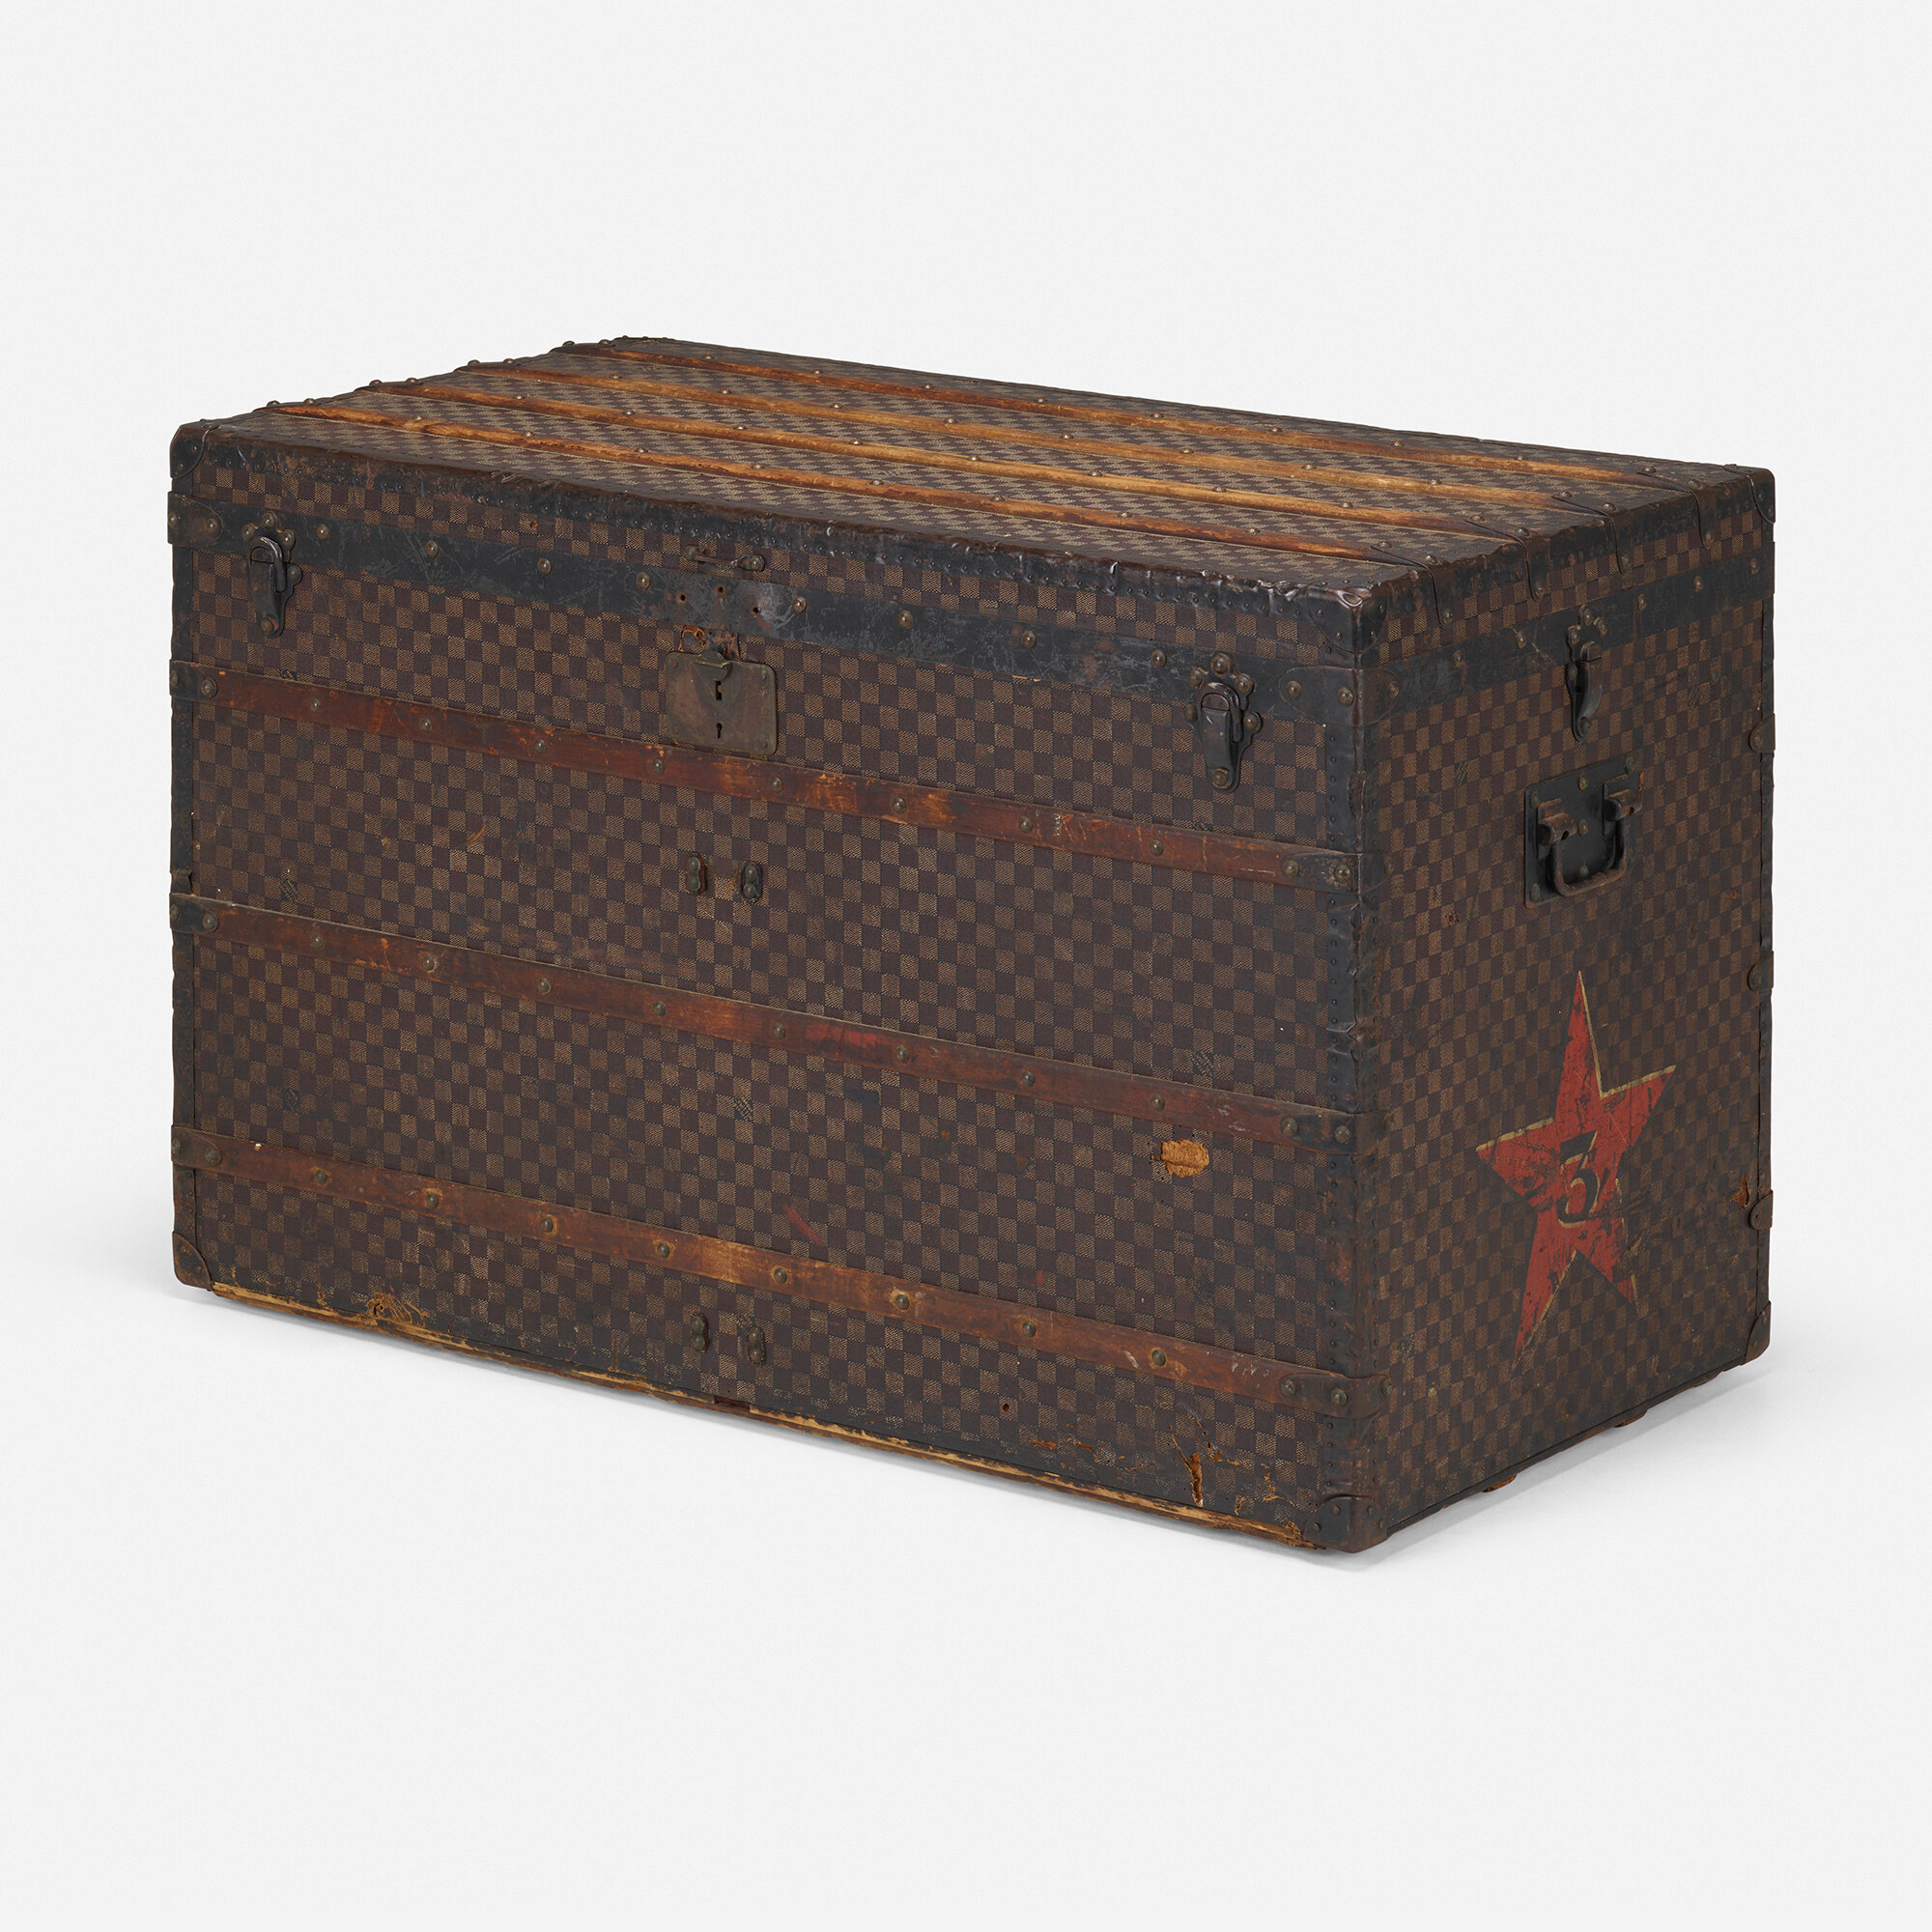 Louis Vuitton Steamer Trunk, Early 20th C. for sale at auction on